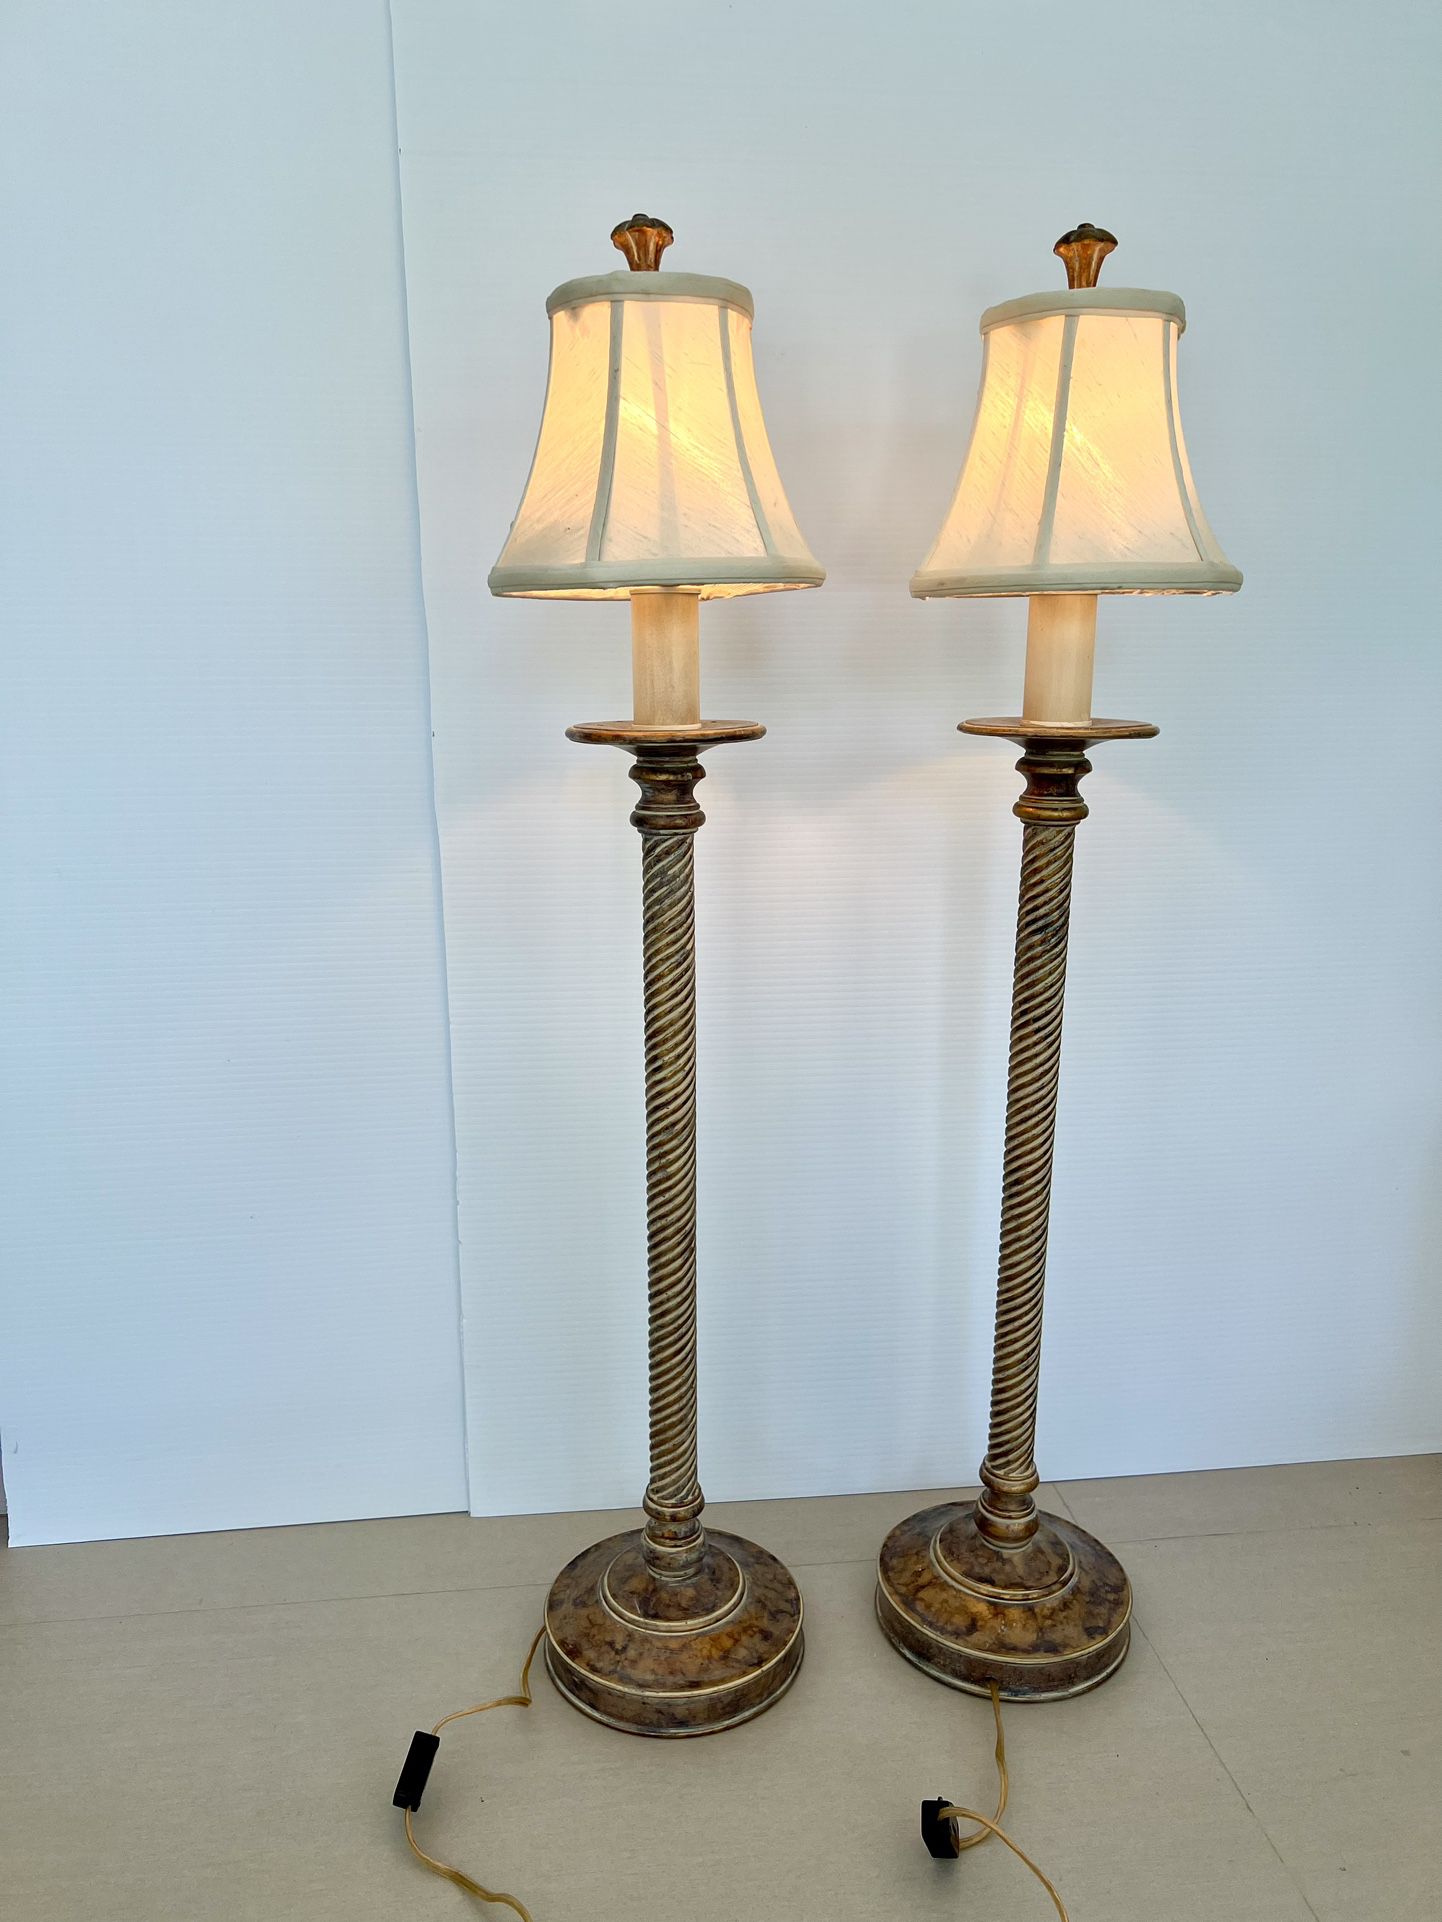 Vintage Table Lamps - Asking Price Is For Each 